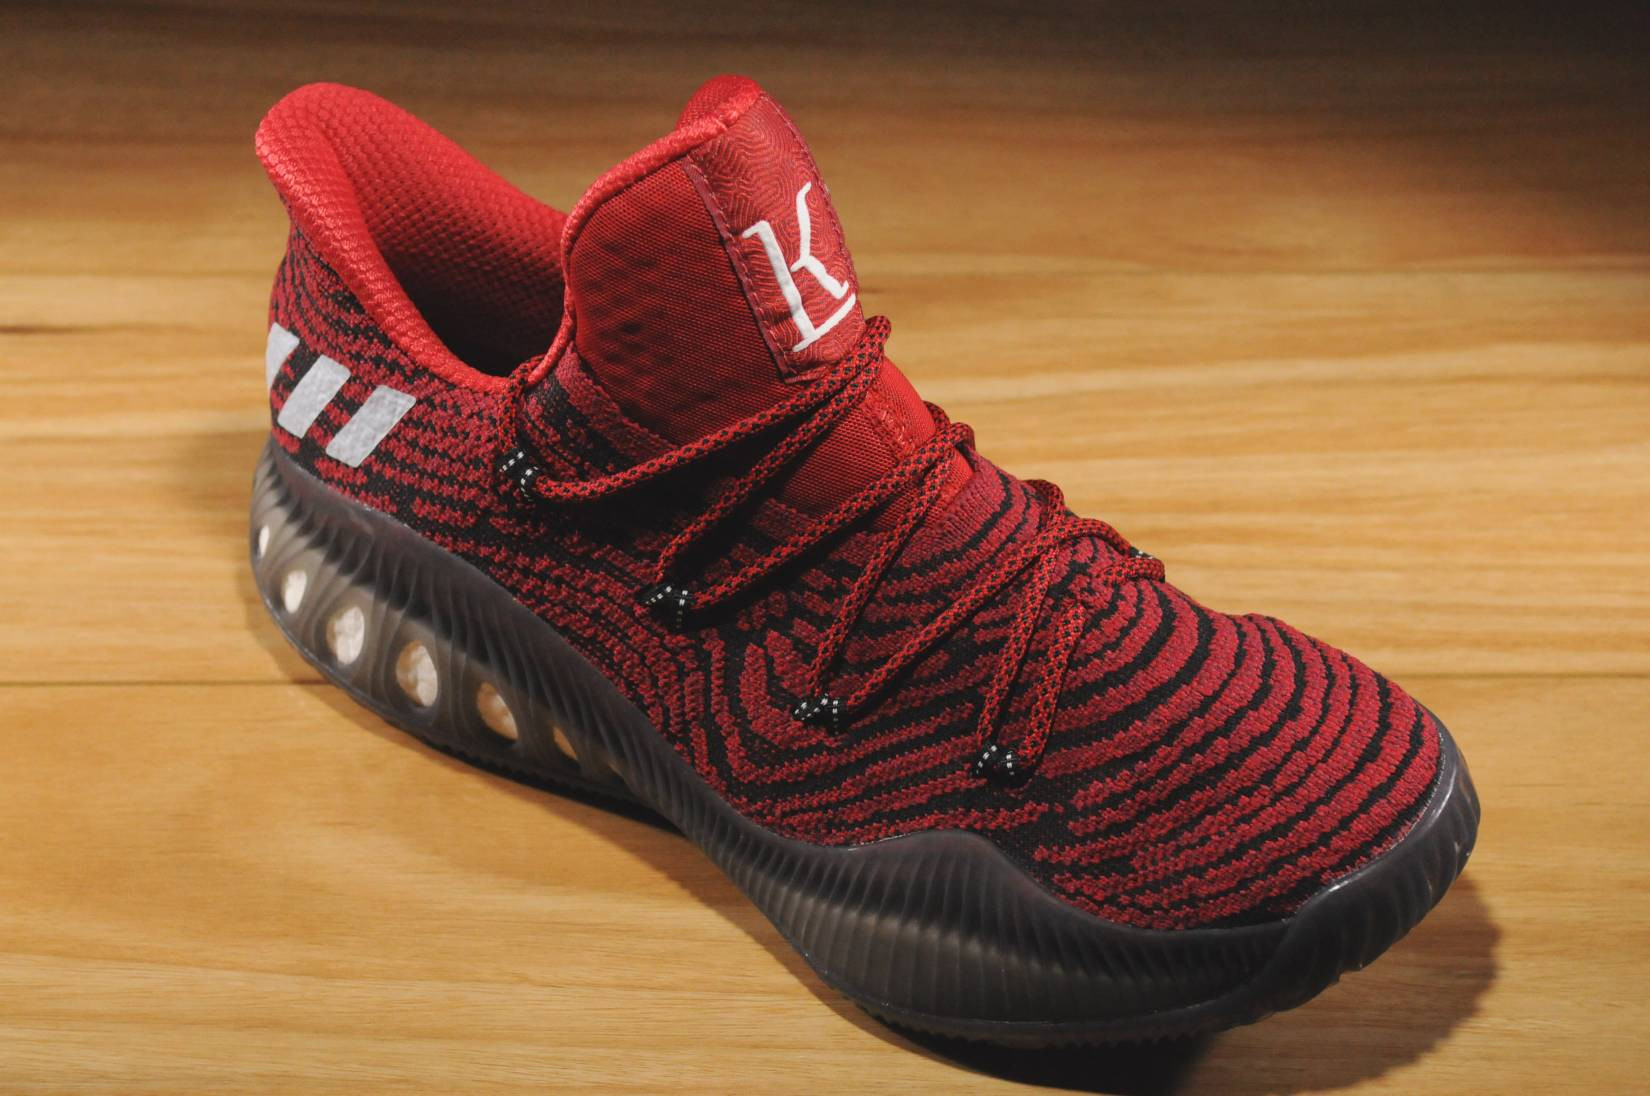 There's an adidas Crazy Explosive Low 